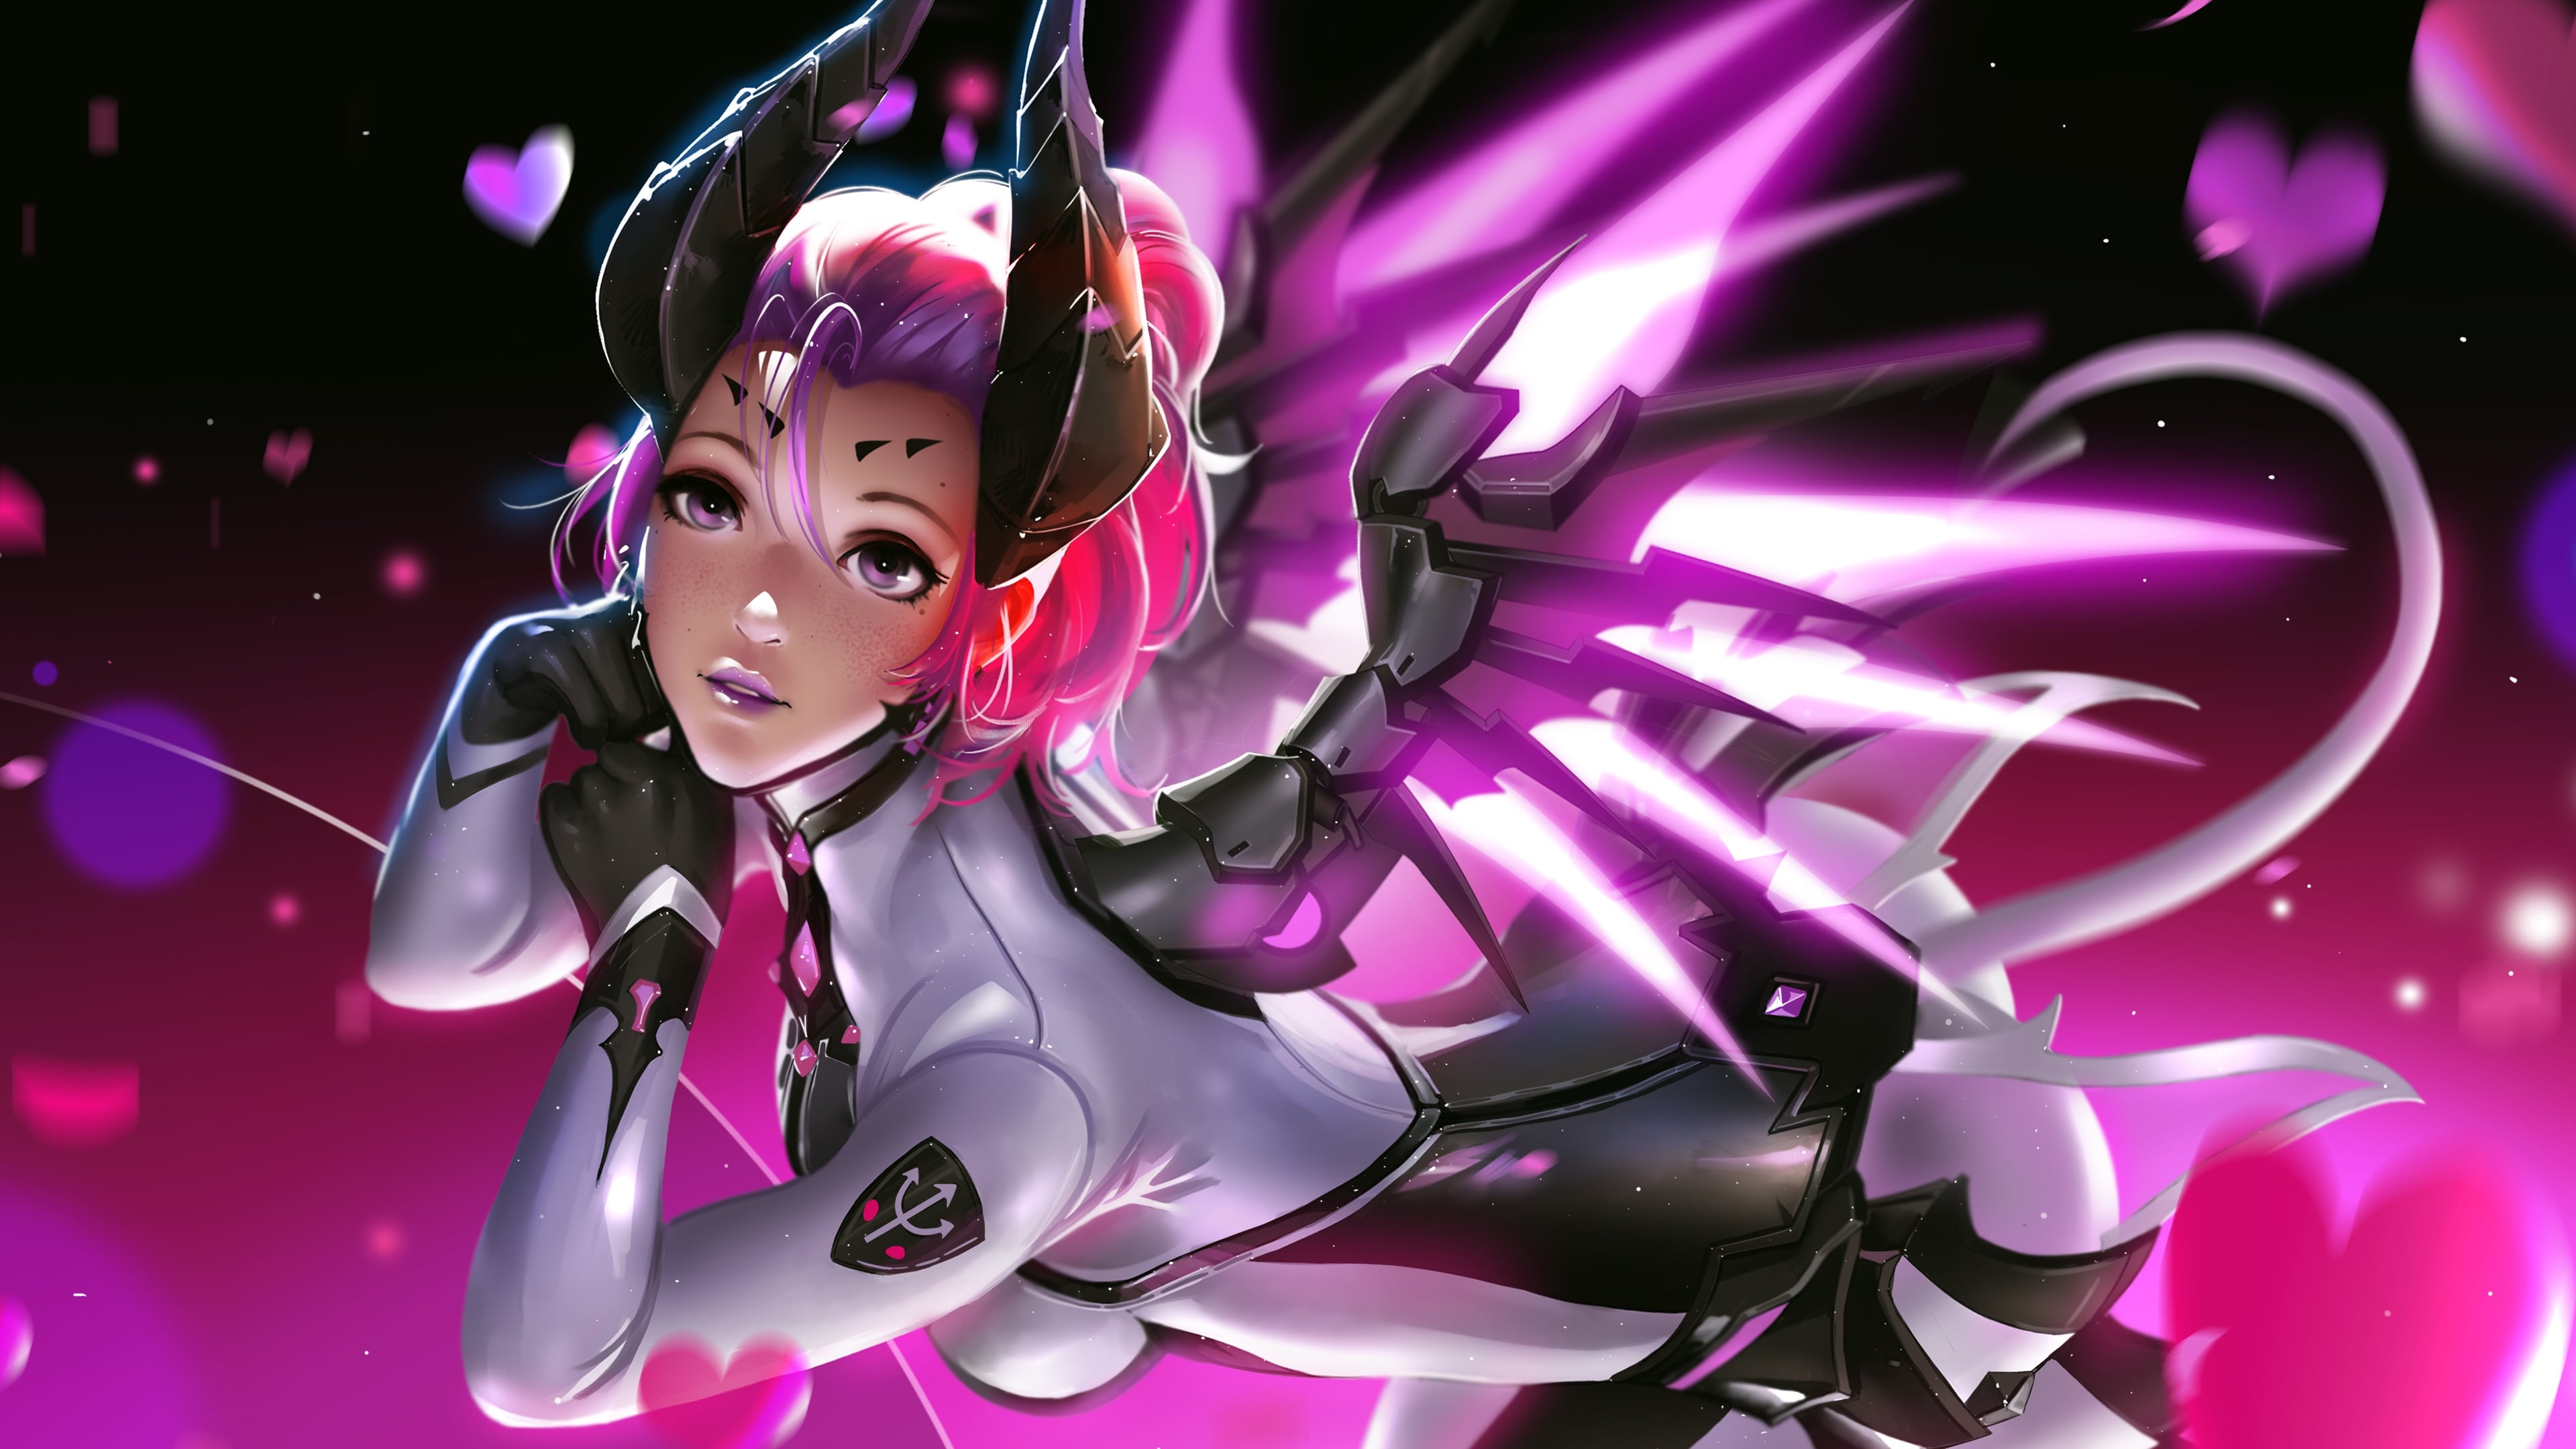 Mercy Overwatch Pink Artwork Girl 4K Wallpaper and Free